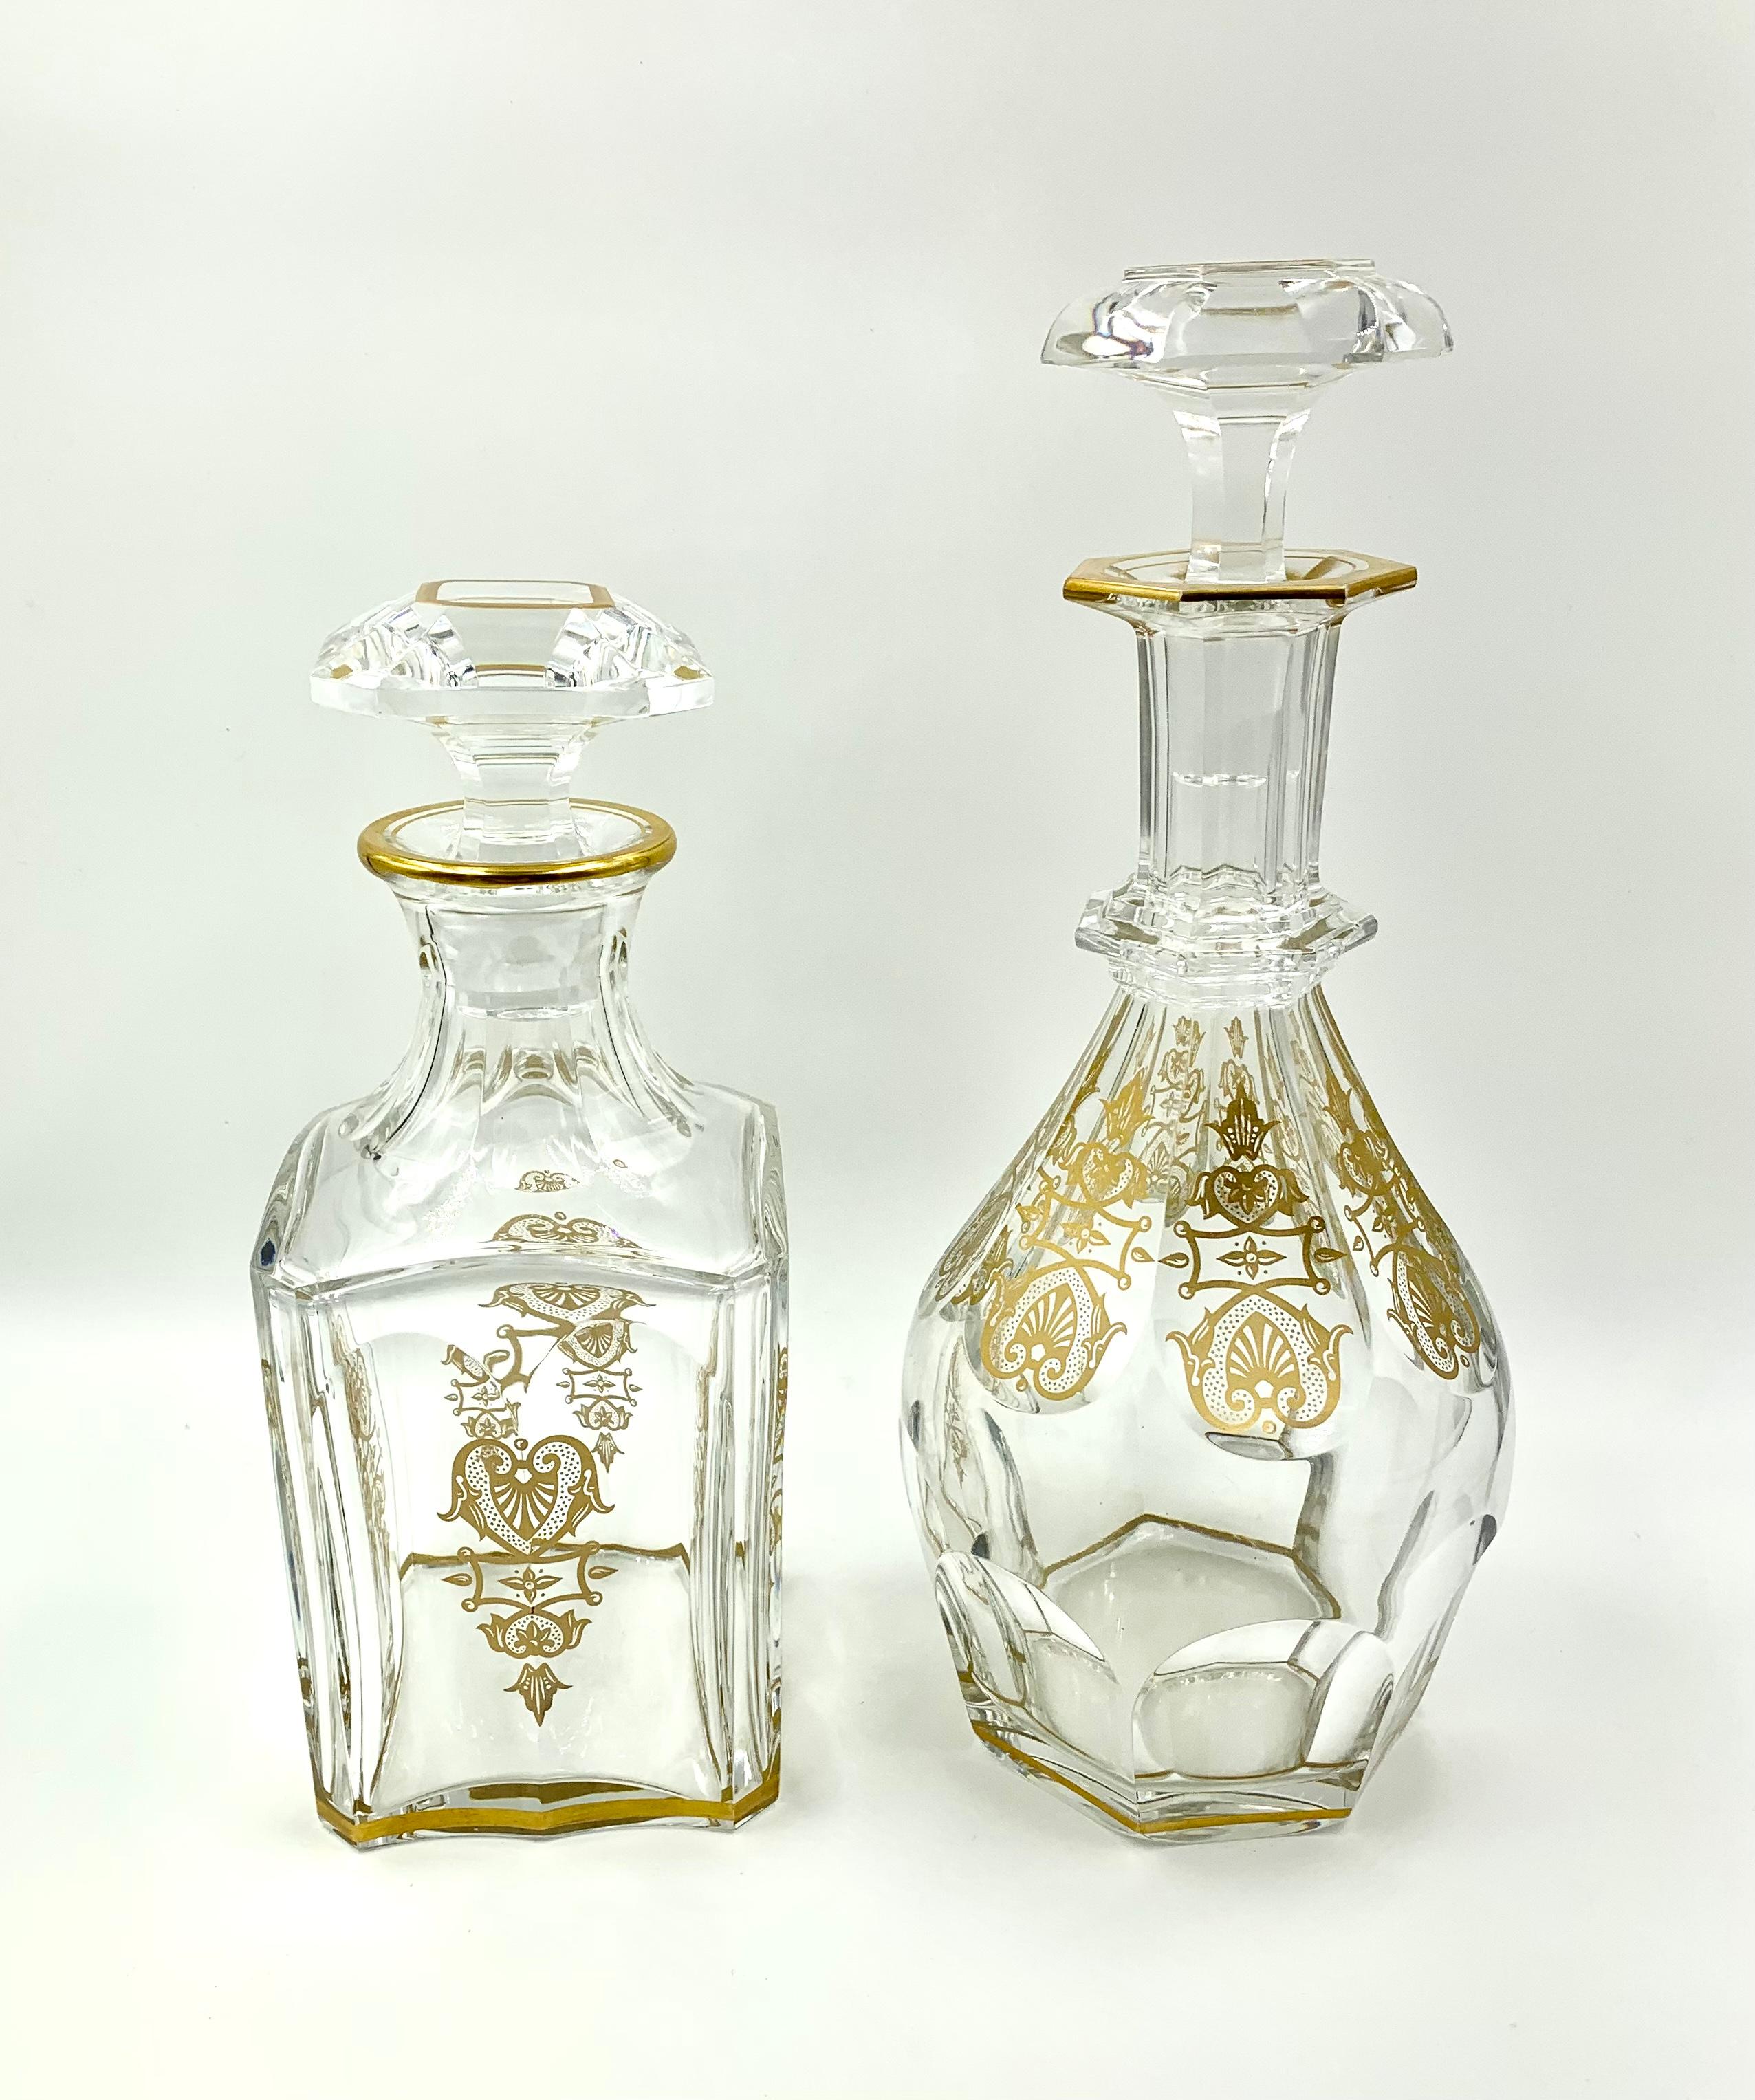 Pristine Baccarat Crystal Harcourt 1841 Empire Whiskey Decanter 4